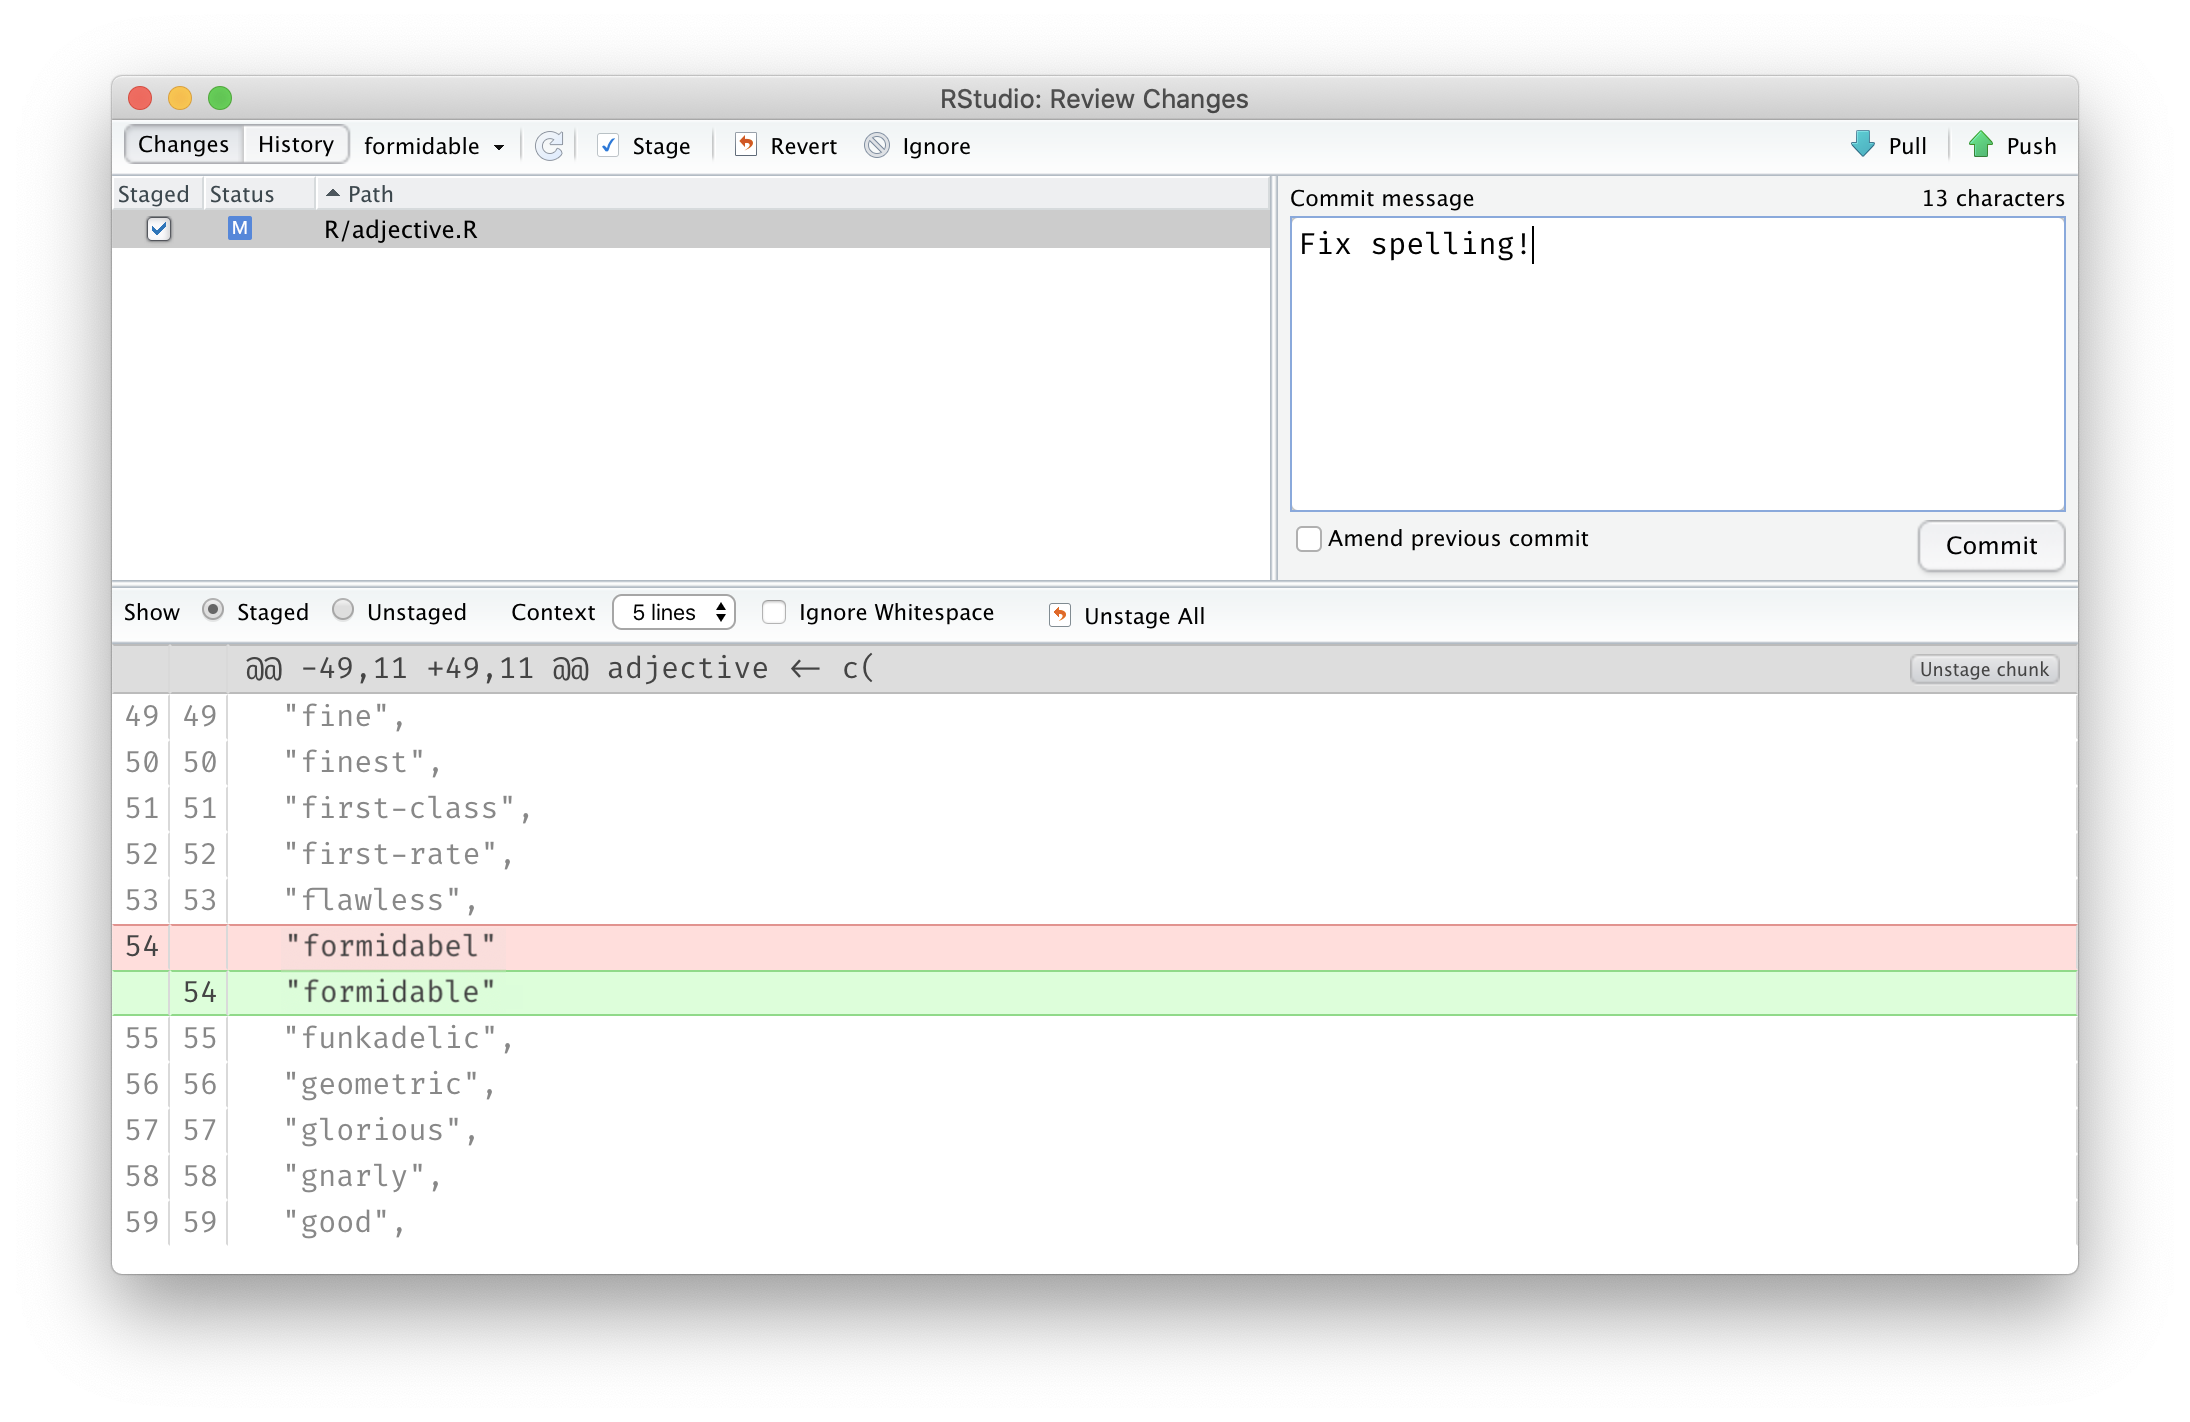 A screenshot of the Rstudio Git pane, showing the changed line with "formidabel" changed to "formidable". The file R/adjective.R is staged for a commit, with the commit message "Fix Spelling!"